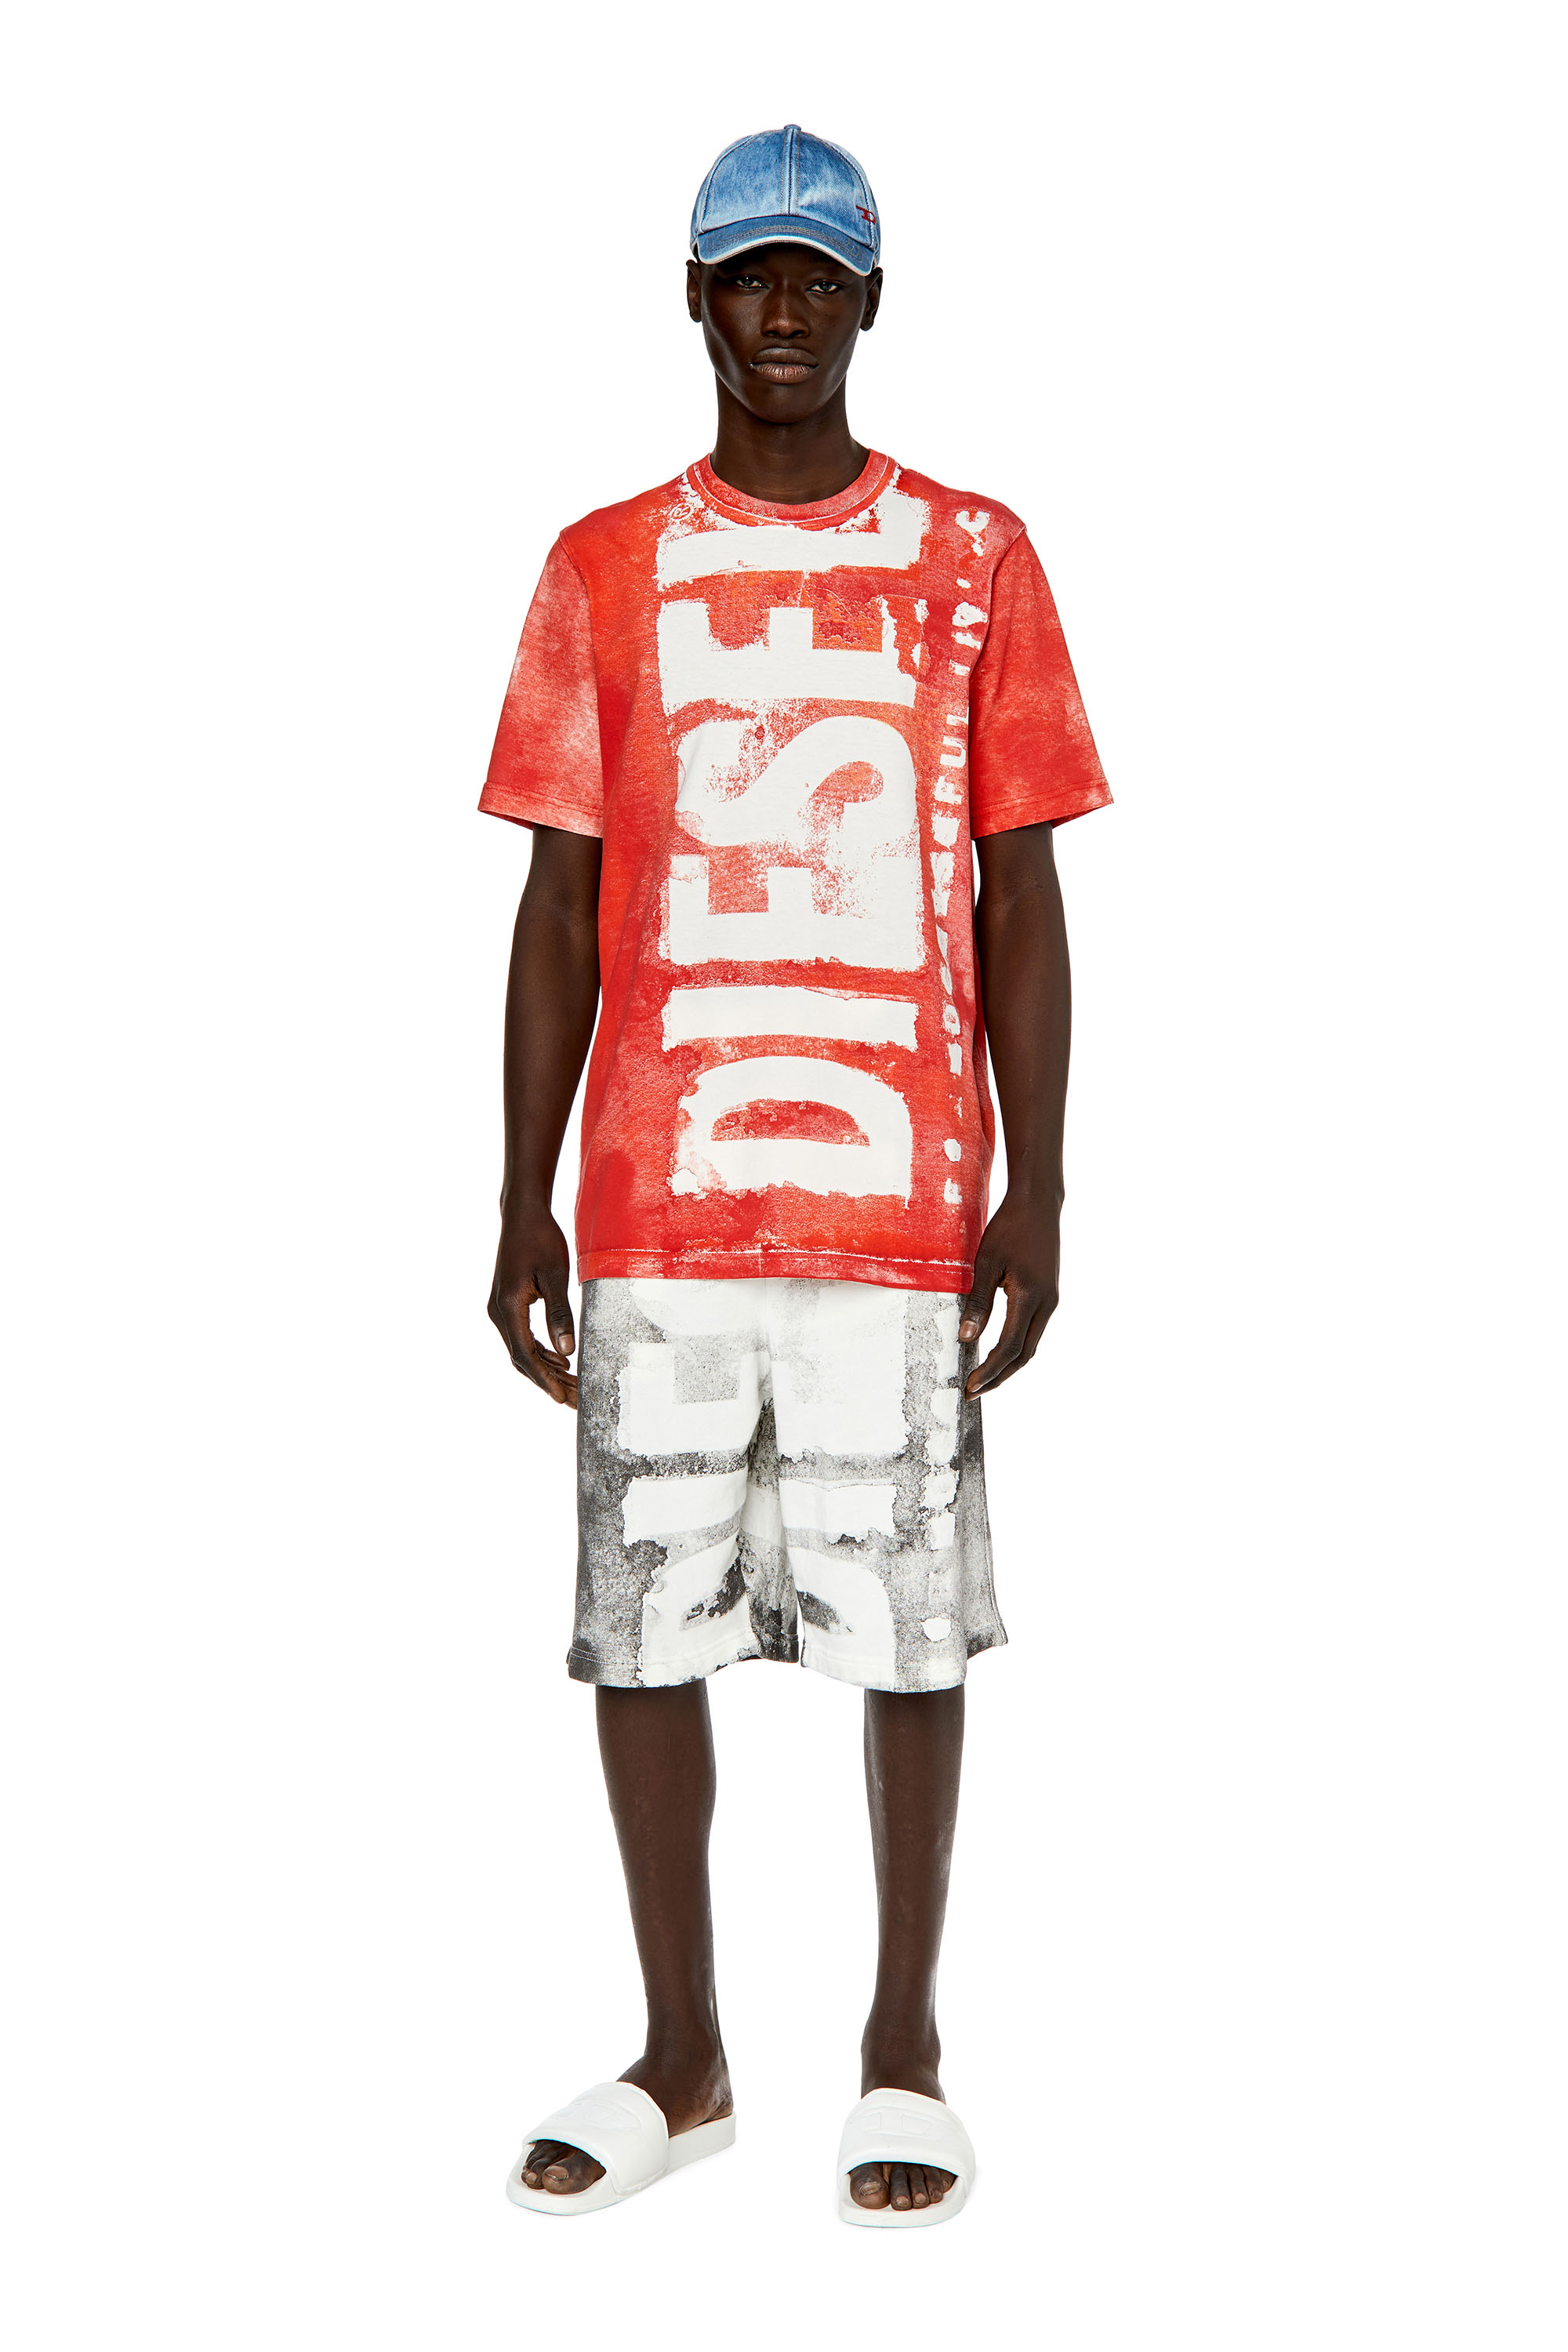 Diesel - T-JUST-G12, Man T-shirt with bleeding logo in Red - Image 2